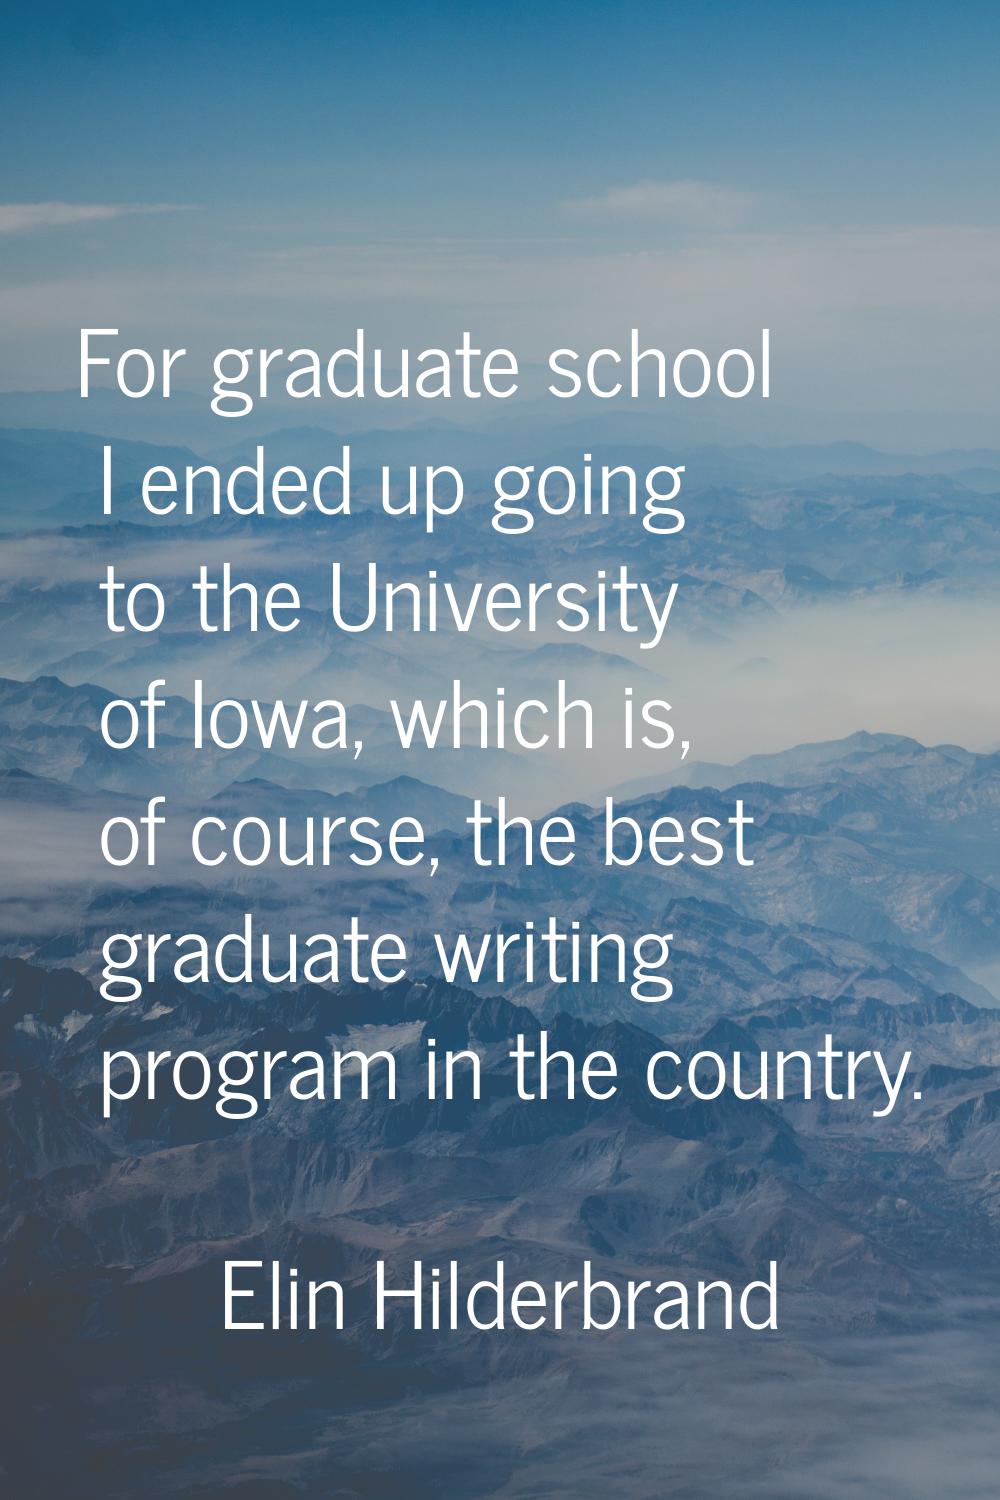 For graduate school I ended up going to the University of Iowa, which is, of course, the best gradu